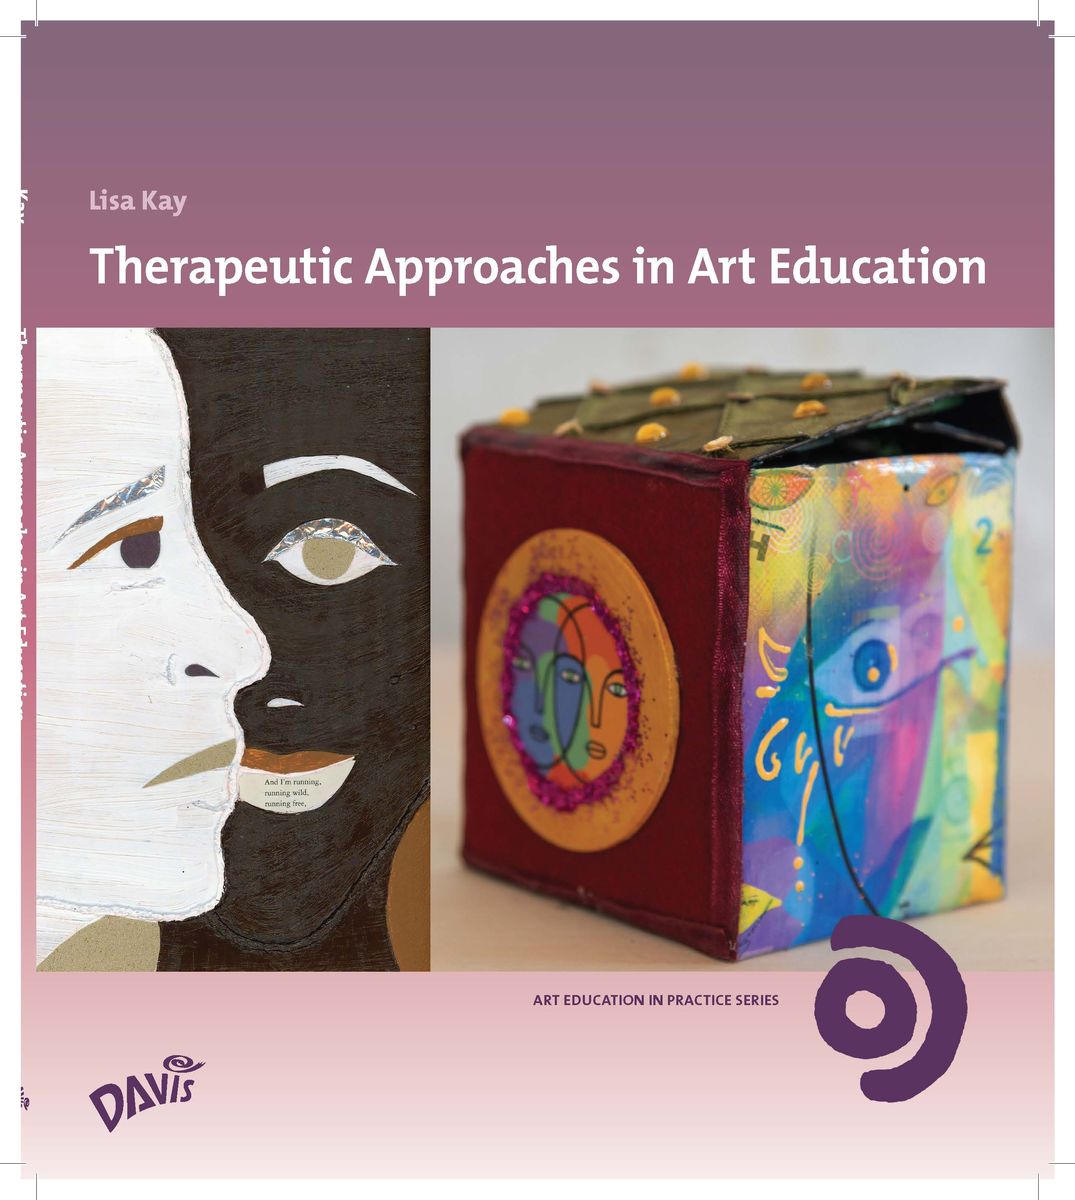 Therapeutic Approaches in Art Education by Lisa Kay